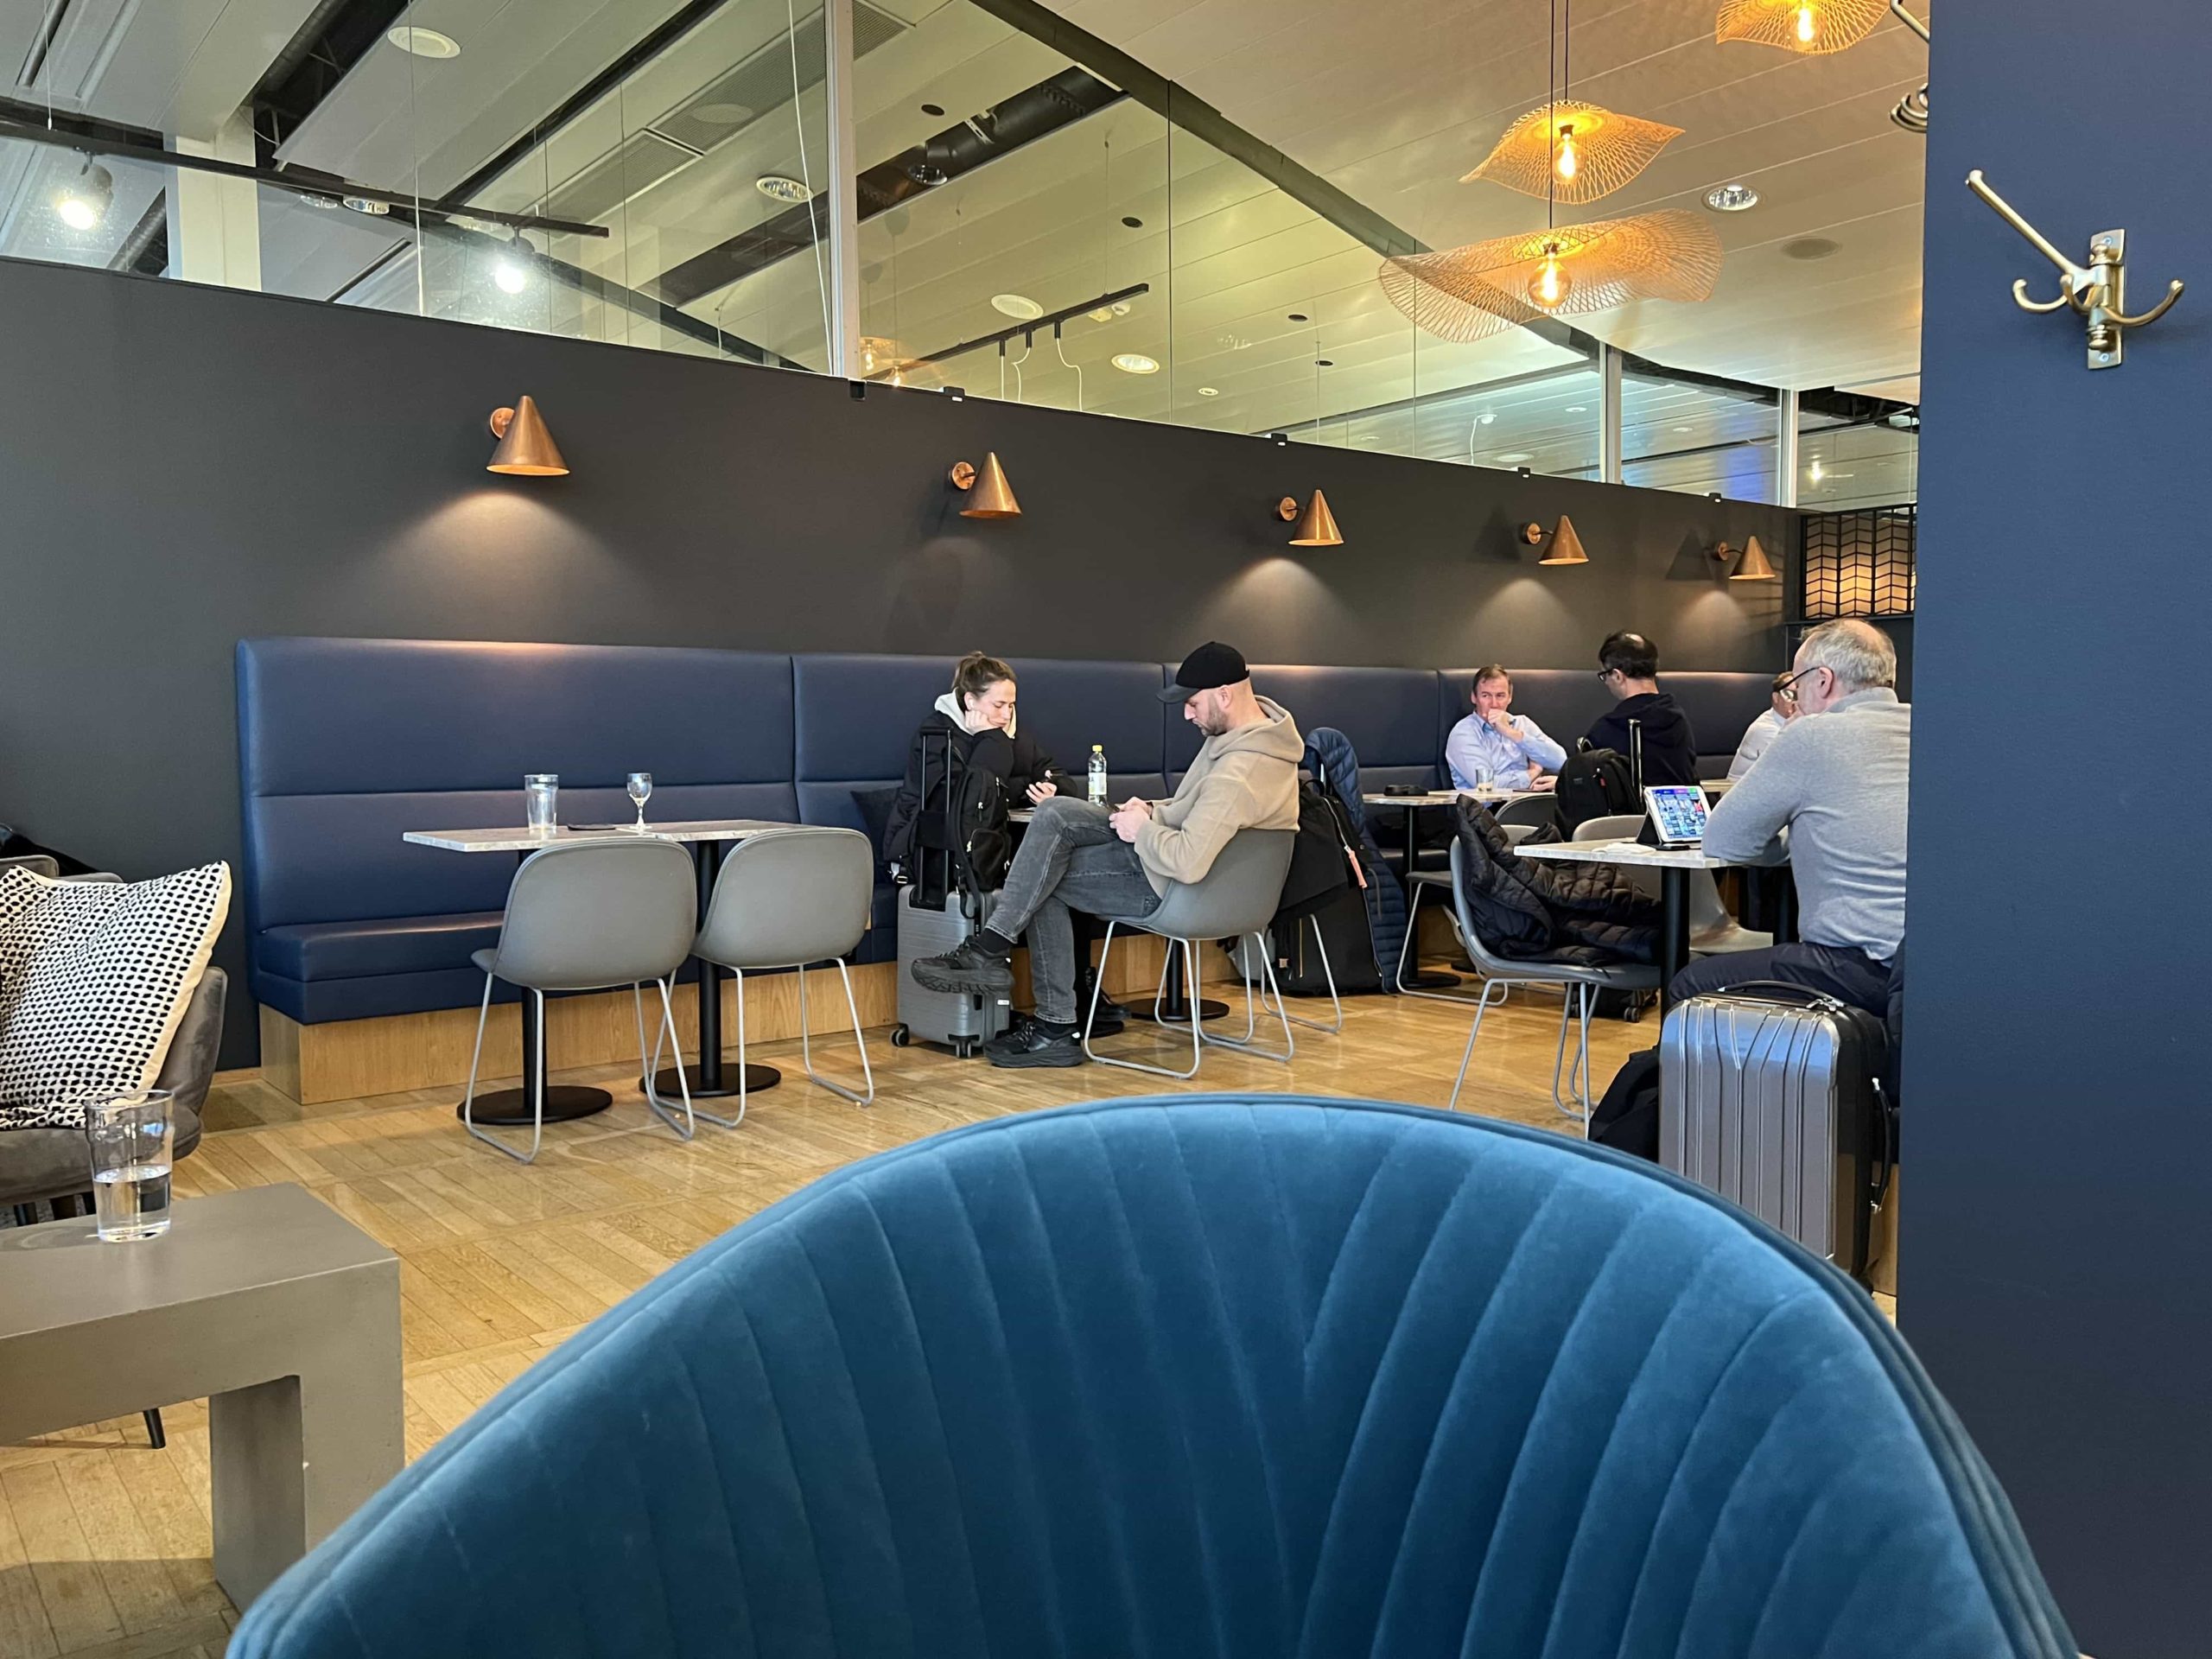 A small area of restaurant seating in the corner of an airport lounge